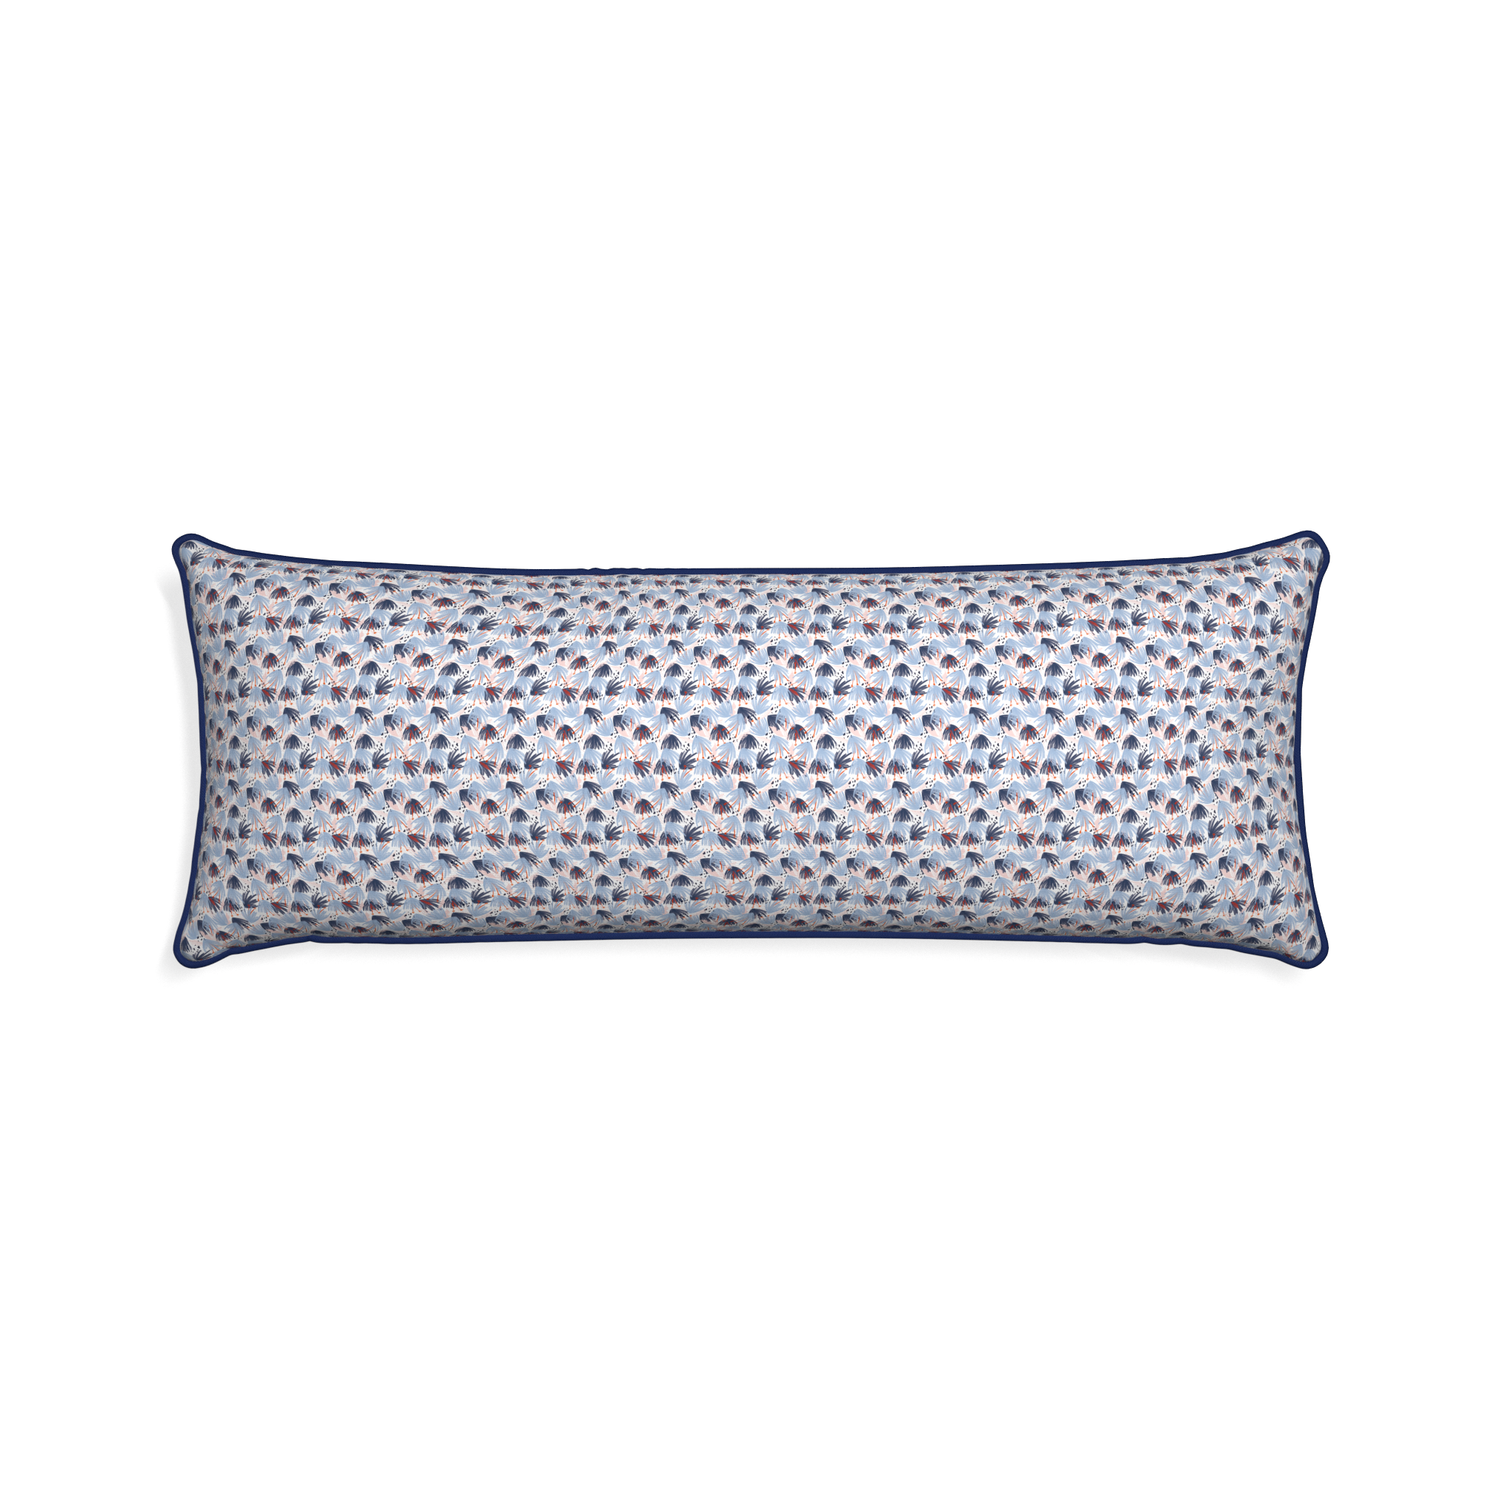 Xl-lumbar eden blue custom pillow with midnight piping on white background